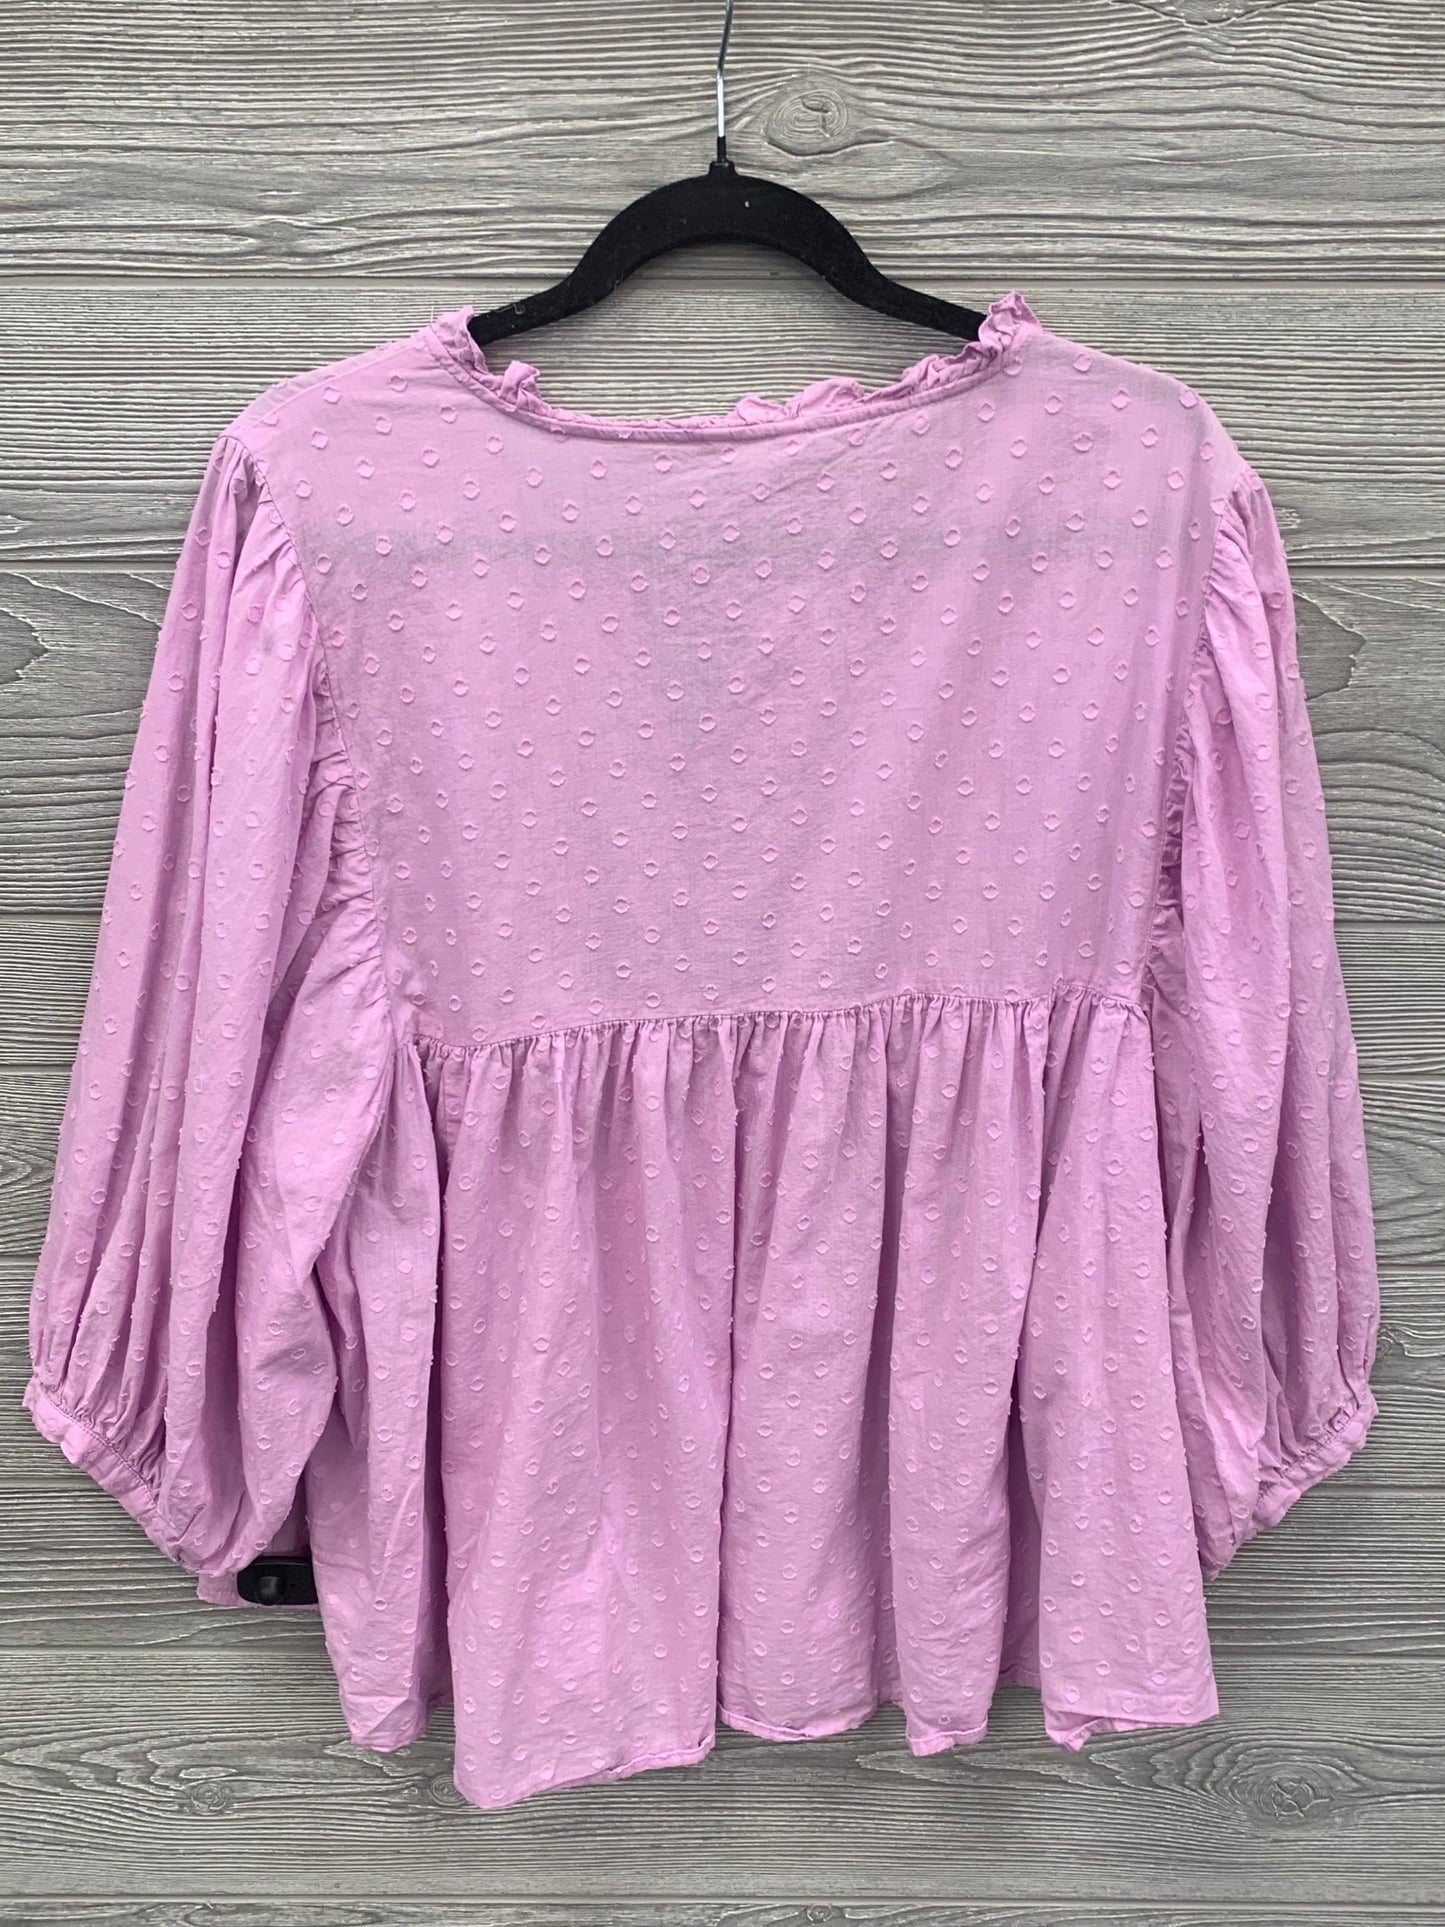 Blouse 3/4 Sleeve By Cato  Size: 3x